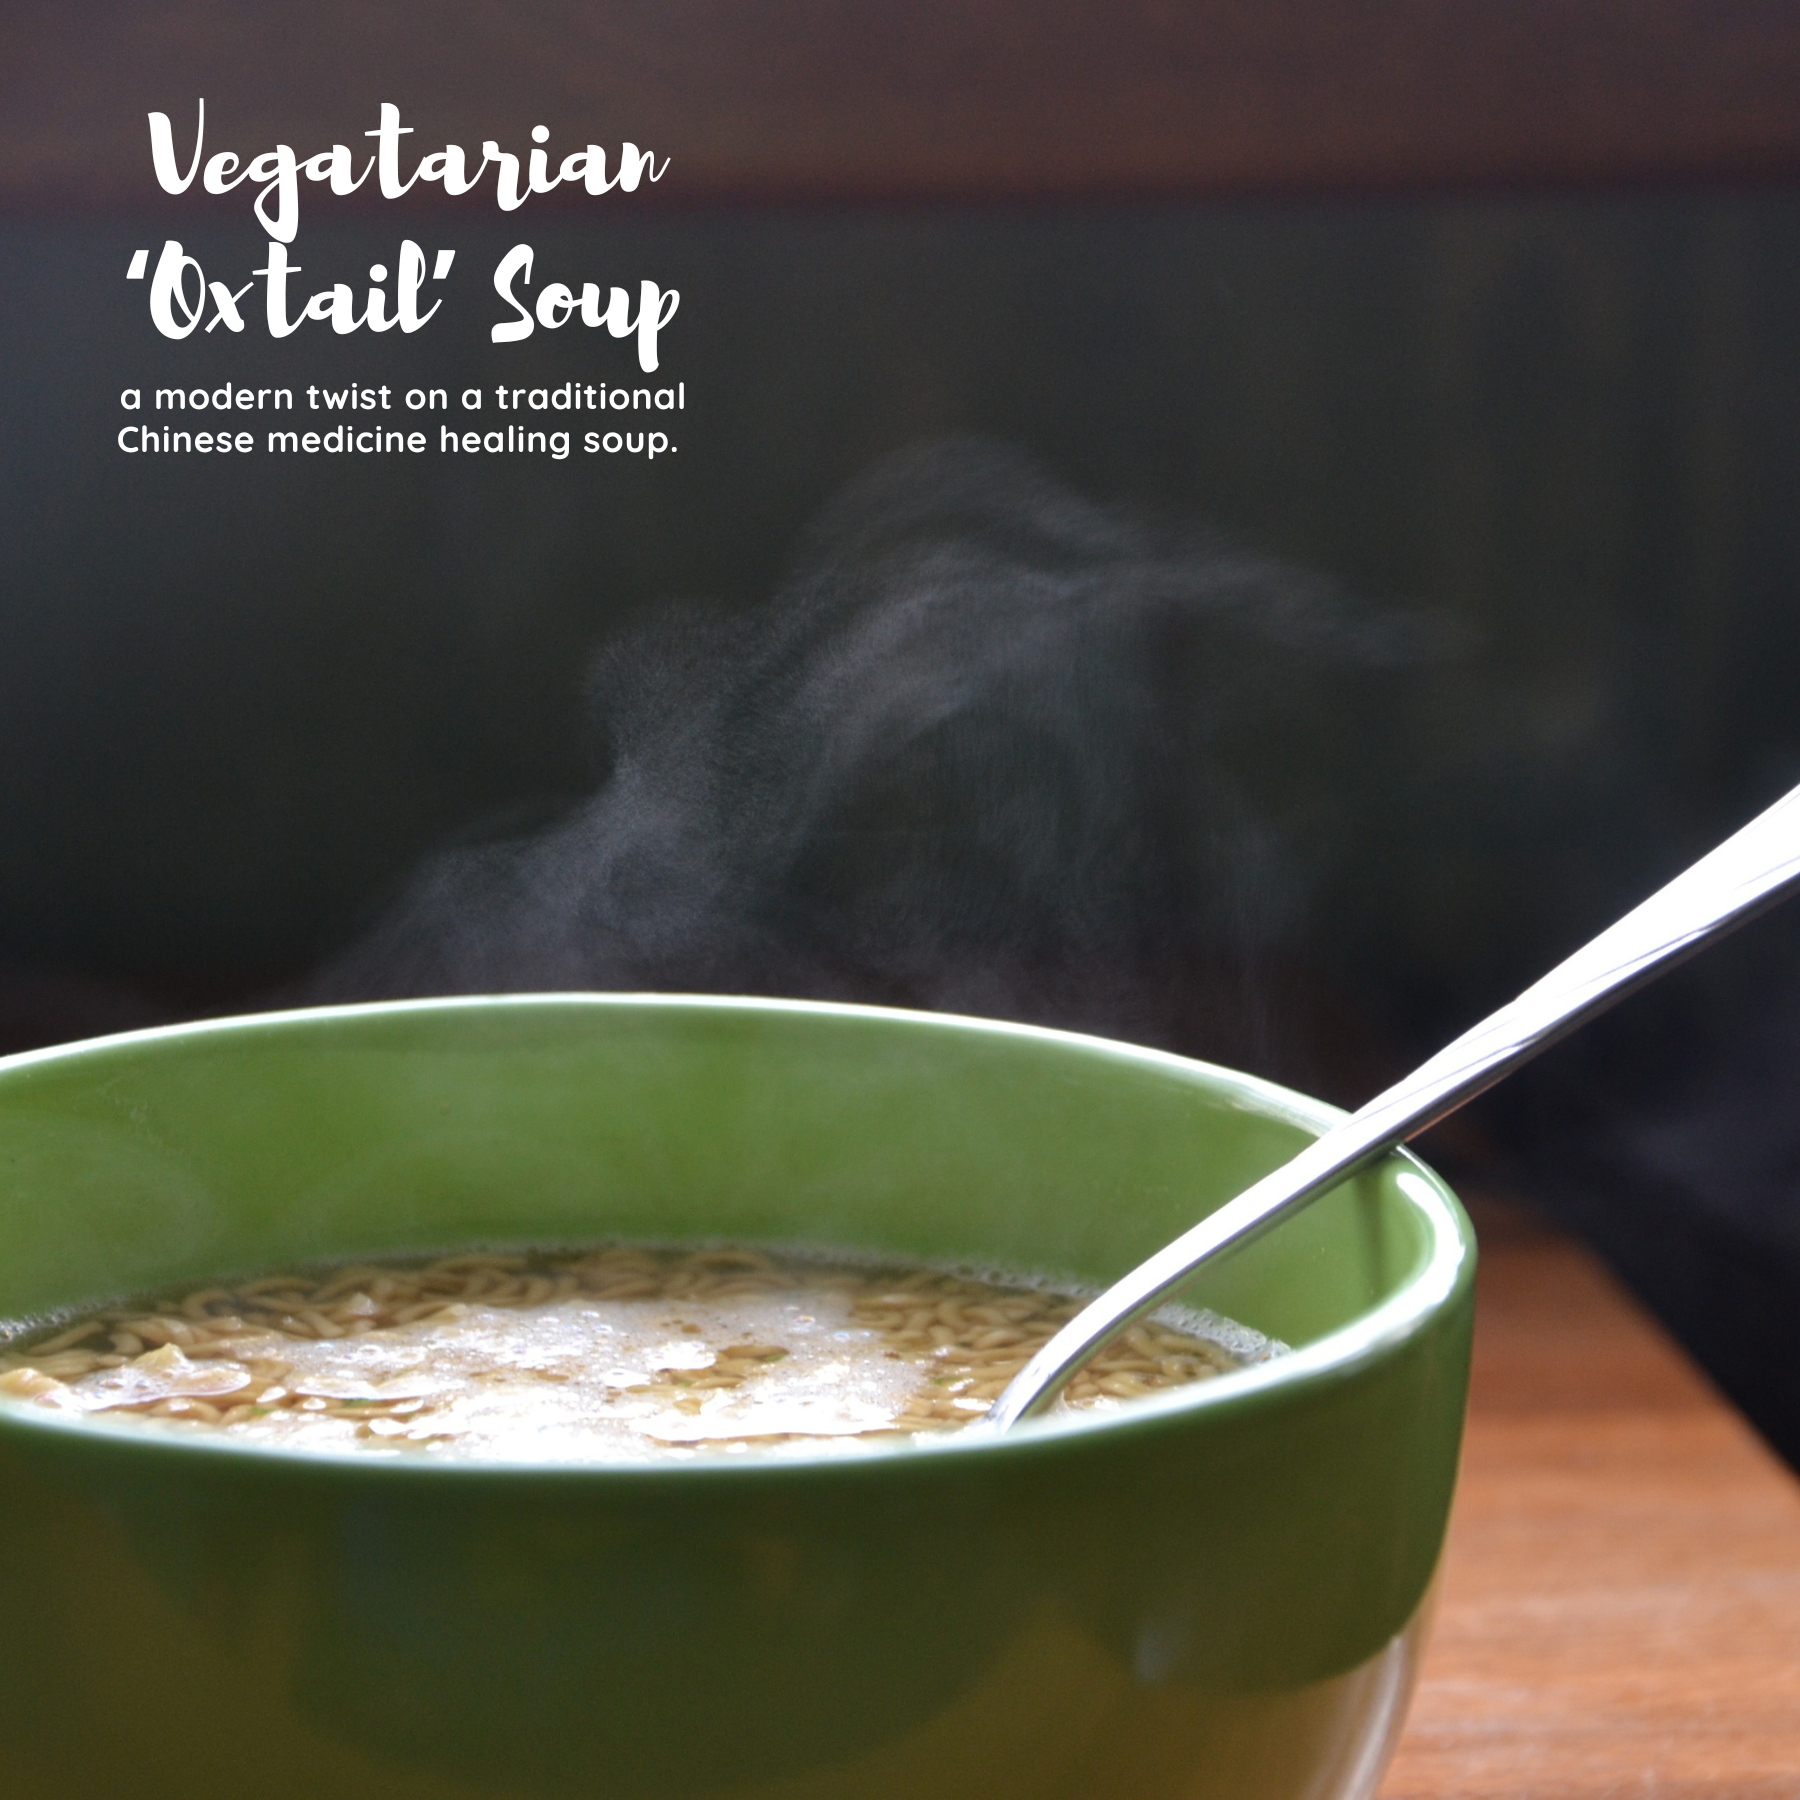 A vegetarian twist to the historically significant Chinese Herbal Healing Oxtail Soup